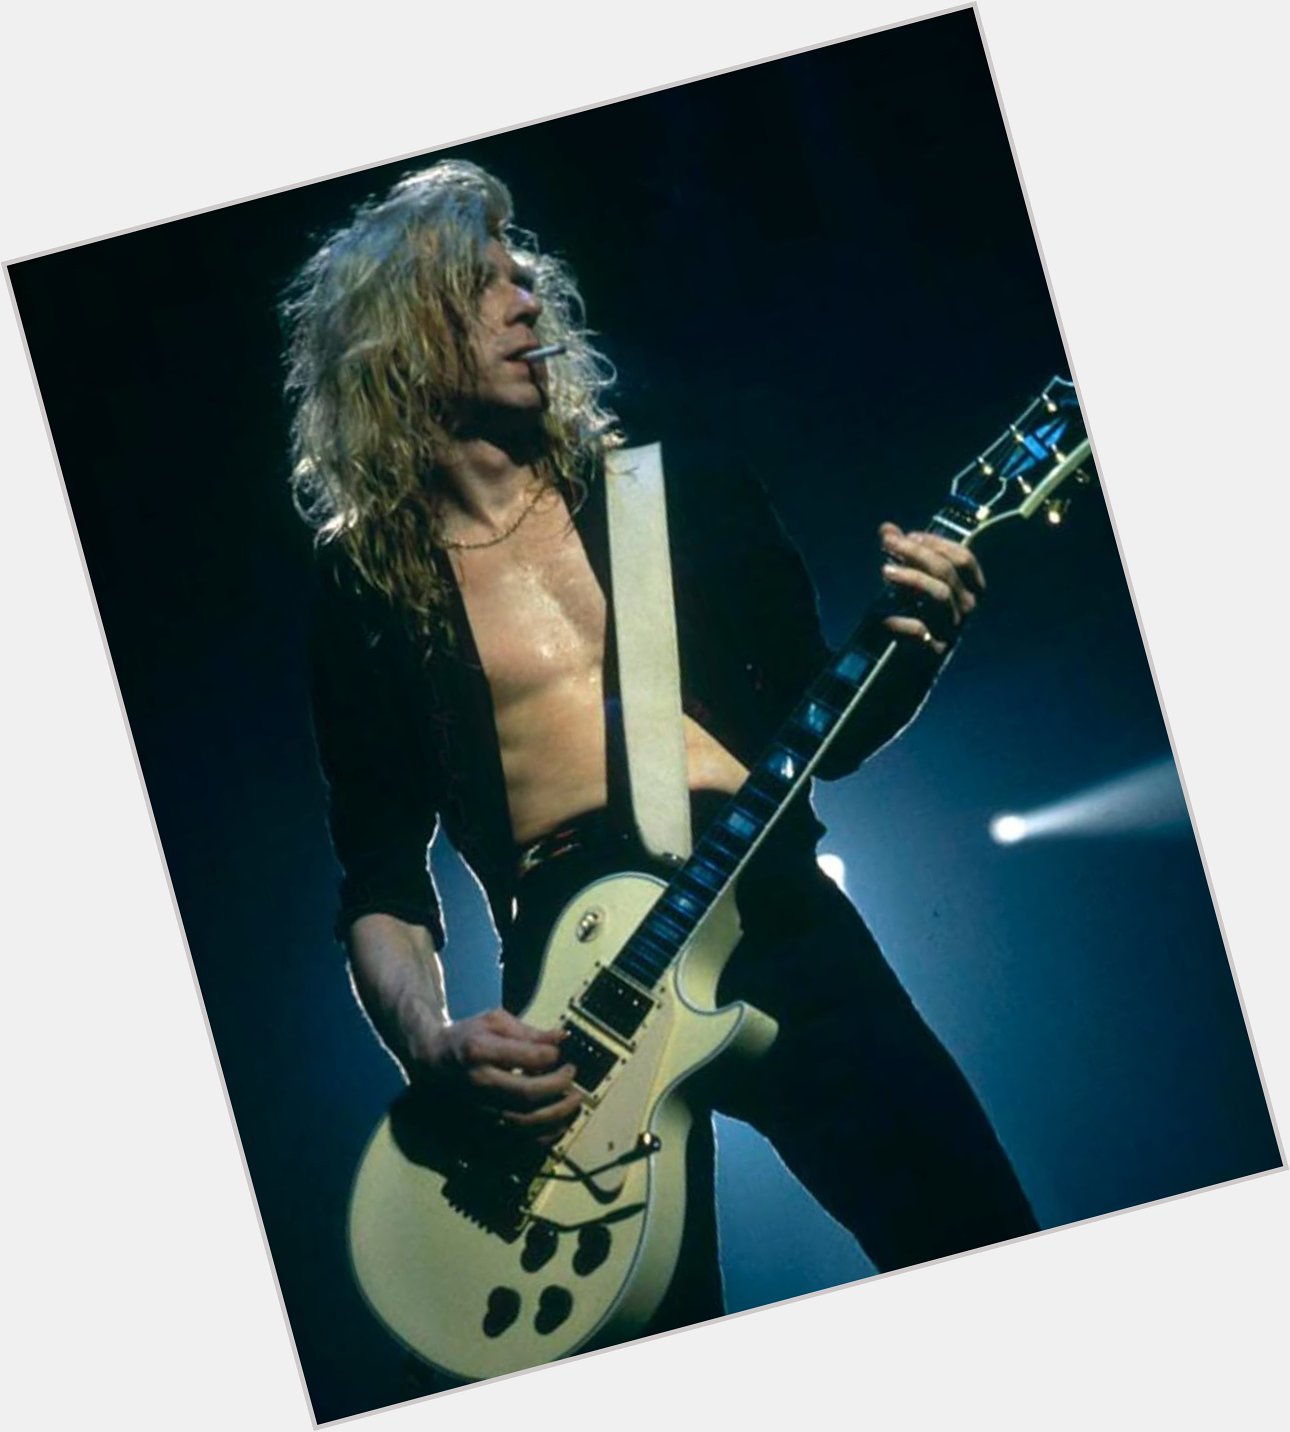 Happy Birthday Steve Clark. He would have been 59 today. Gone but never forgotten.  